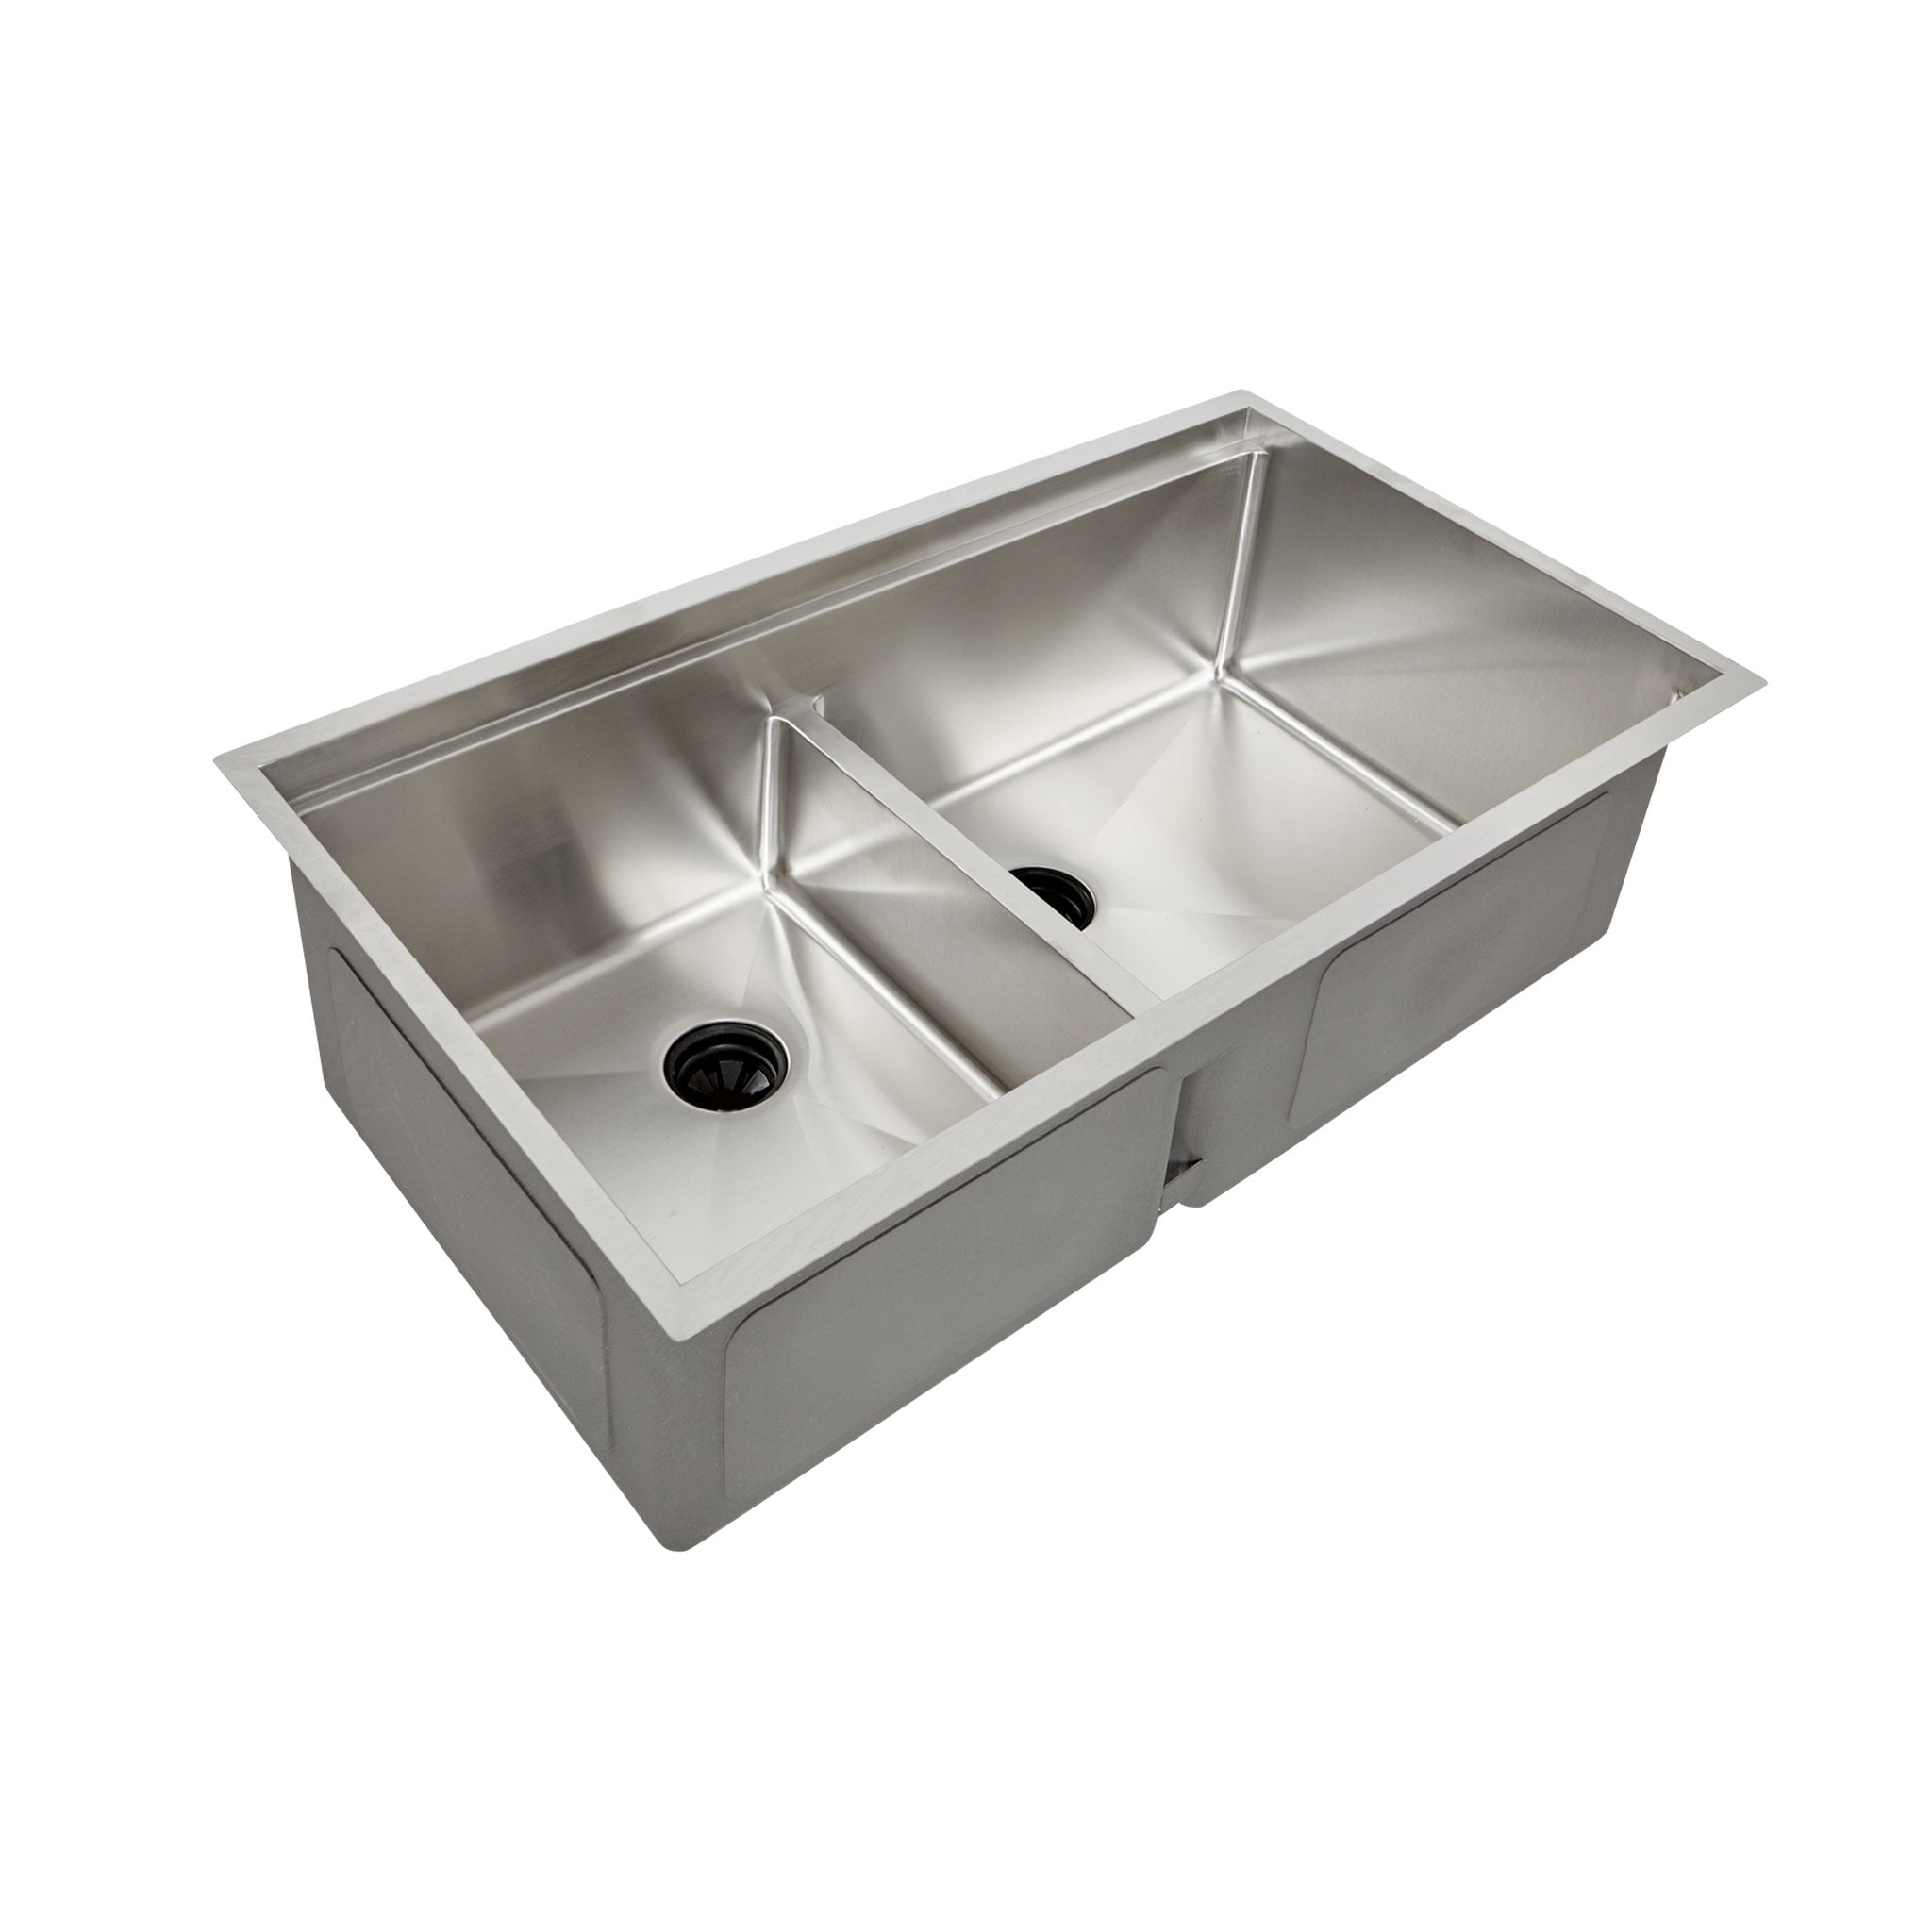 1/2 Radius 34 Workstation Double Bowl Sink with low divide